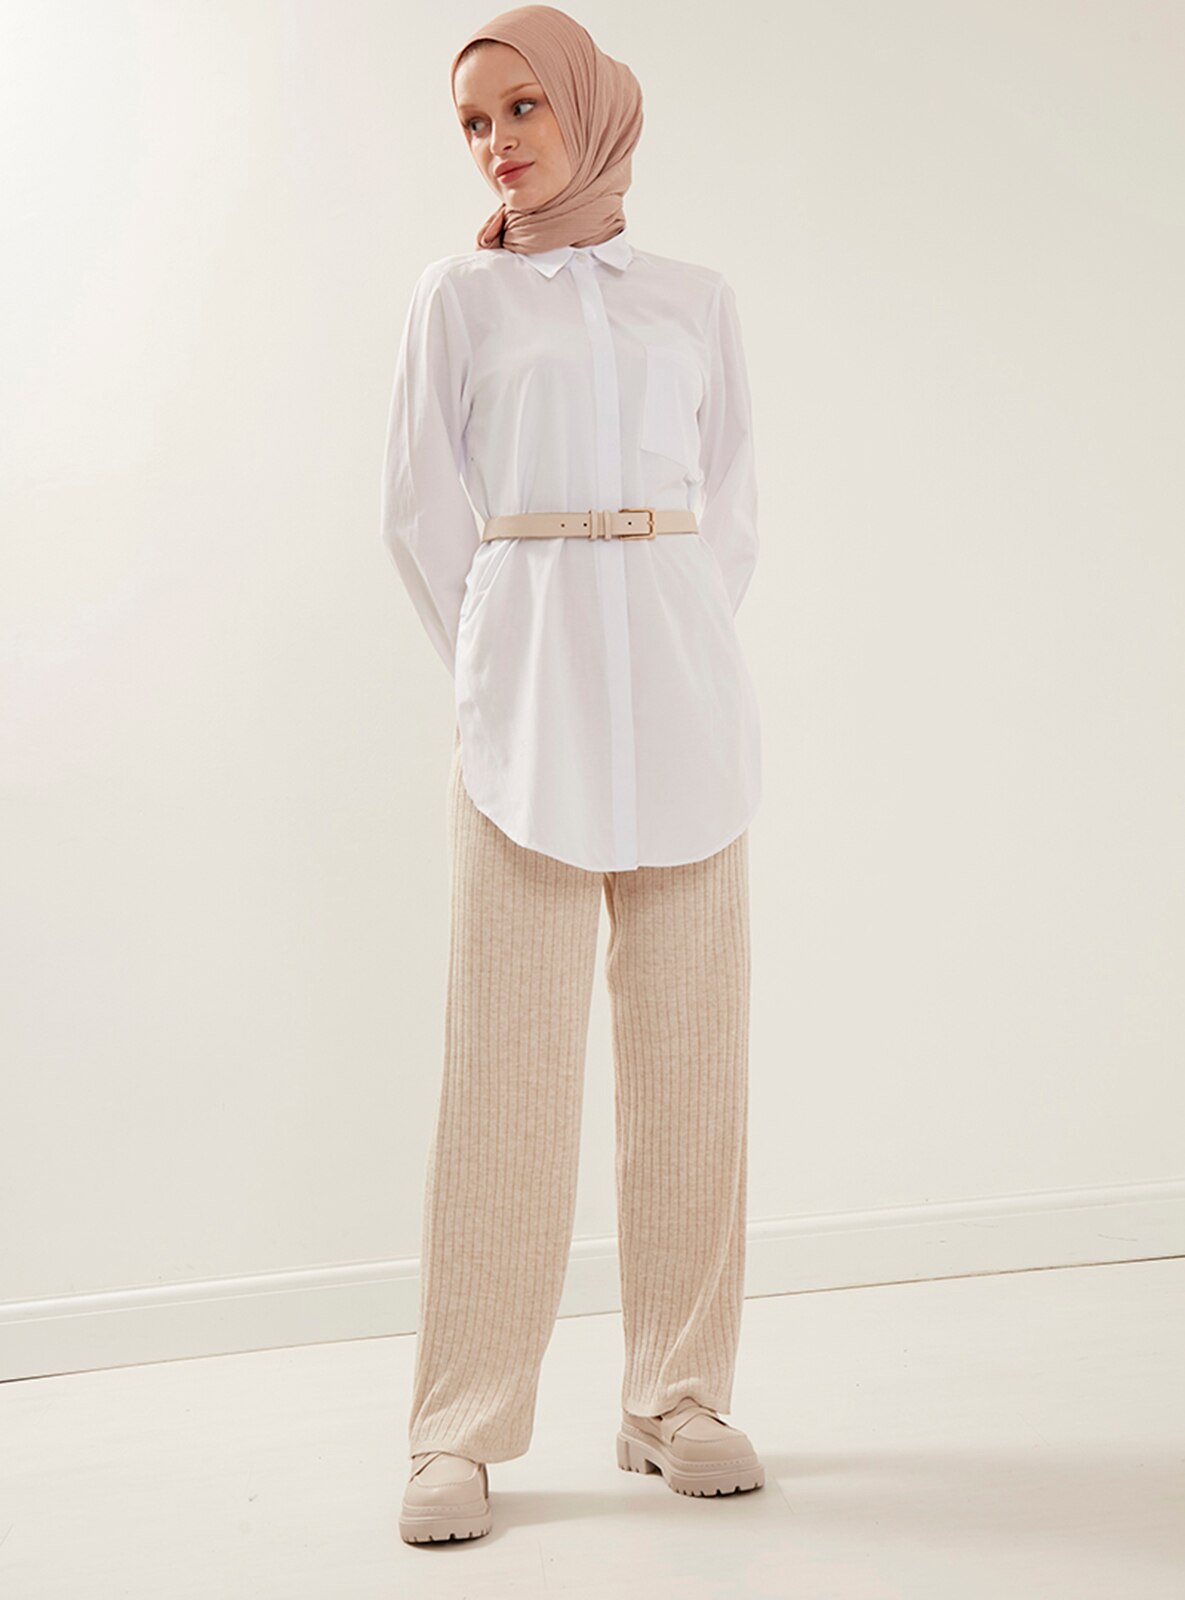 Knitwear Oversized Pants Stone With Ribbed And Elastic Waist